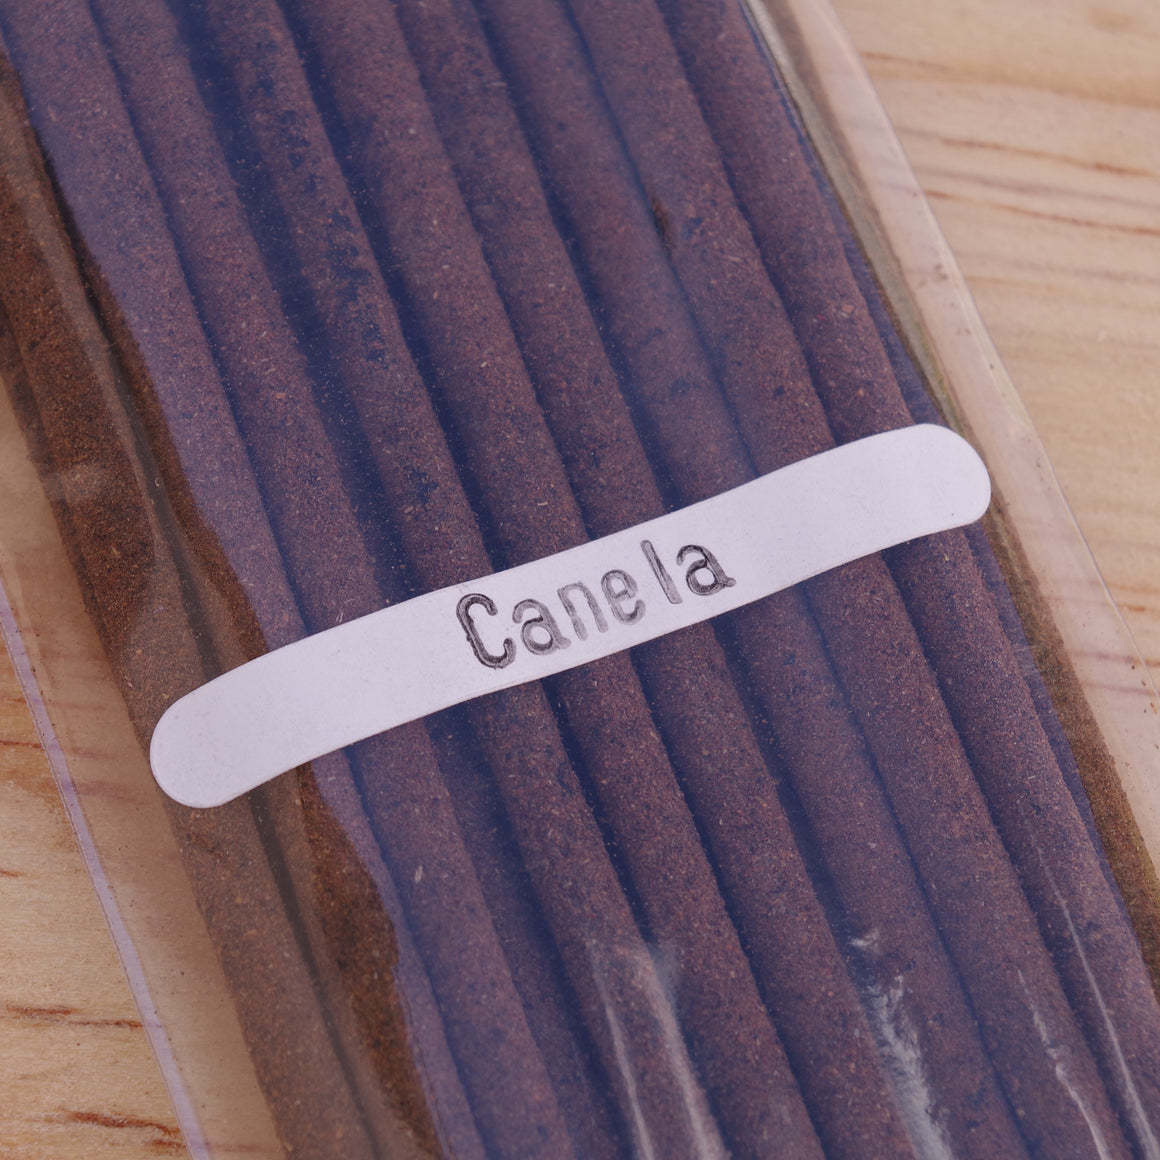 20 Cinnamon Incense Sticks Handrolled In Mexico Long Duration 1.5 hours